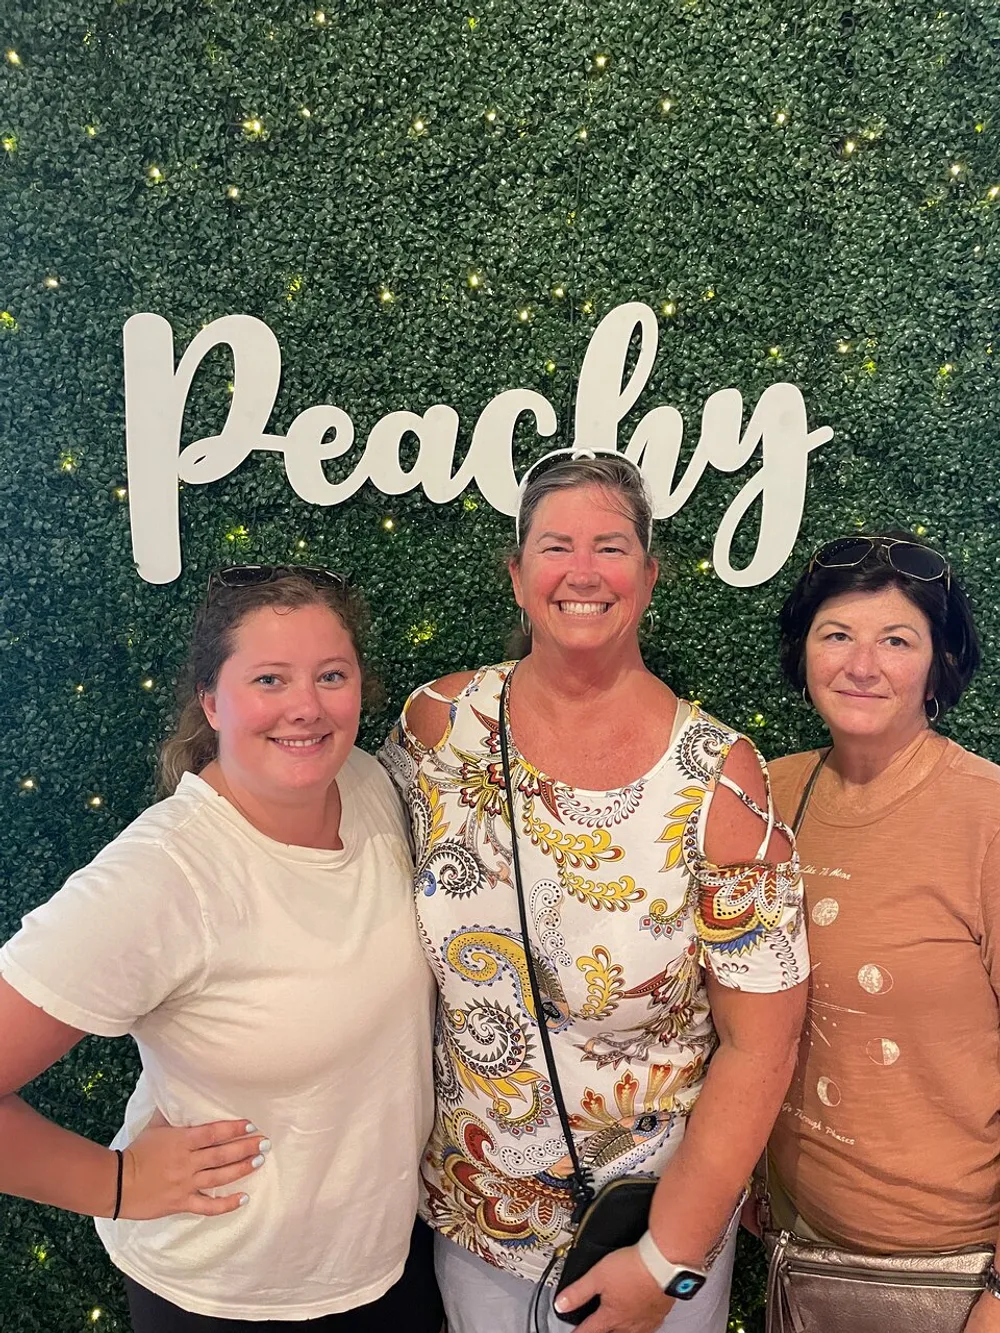 Three smiling women are posing together in front of a leafy green wall with the word Peachy written on it